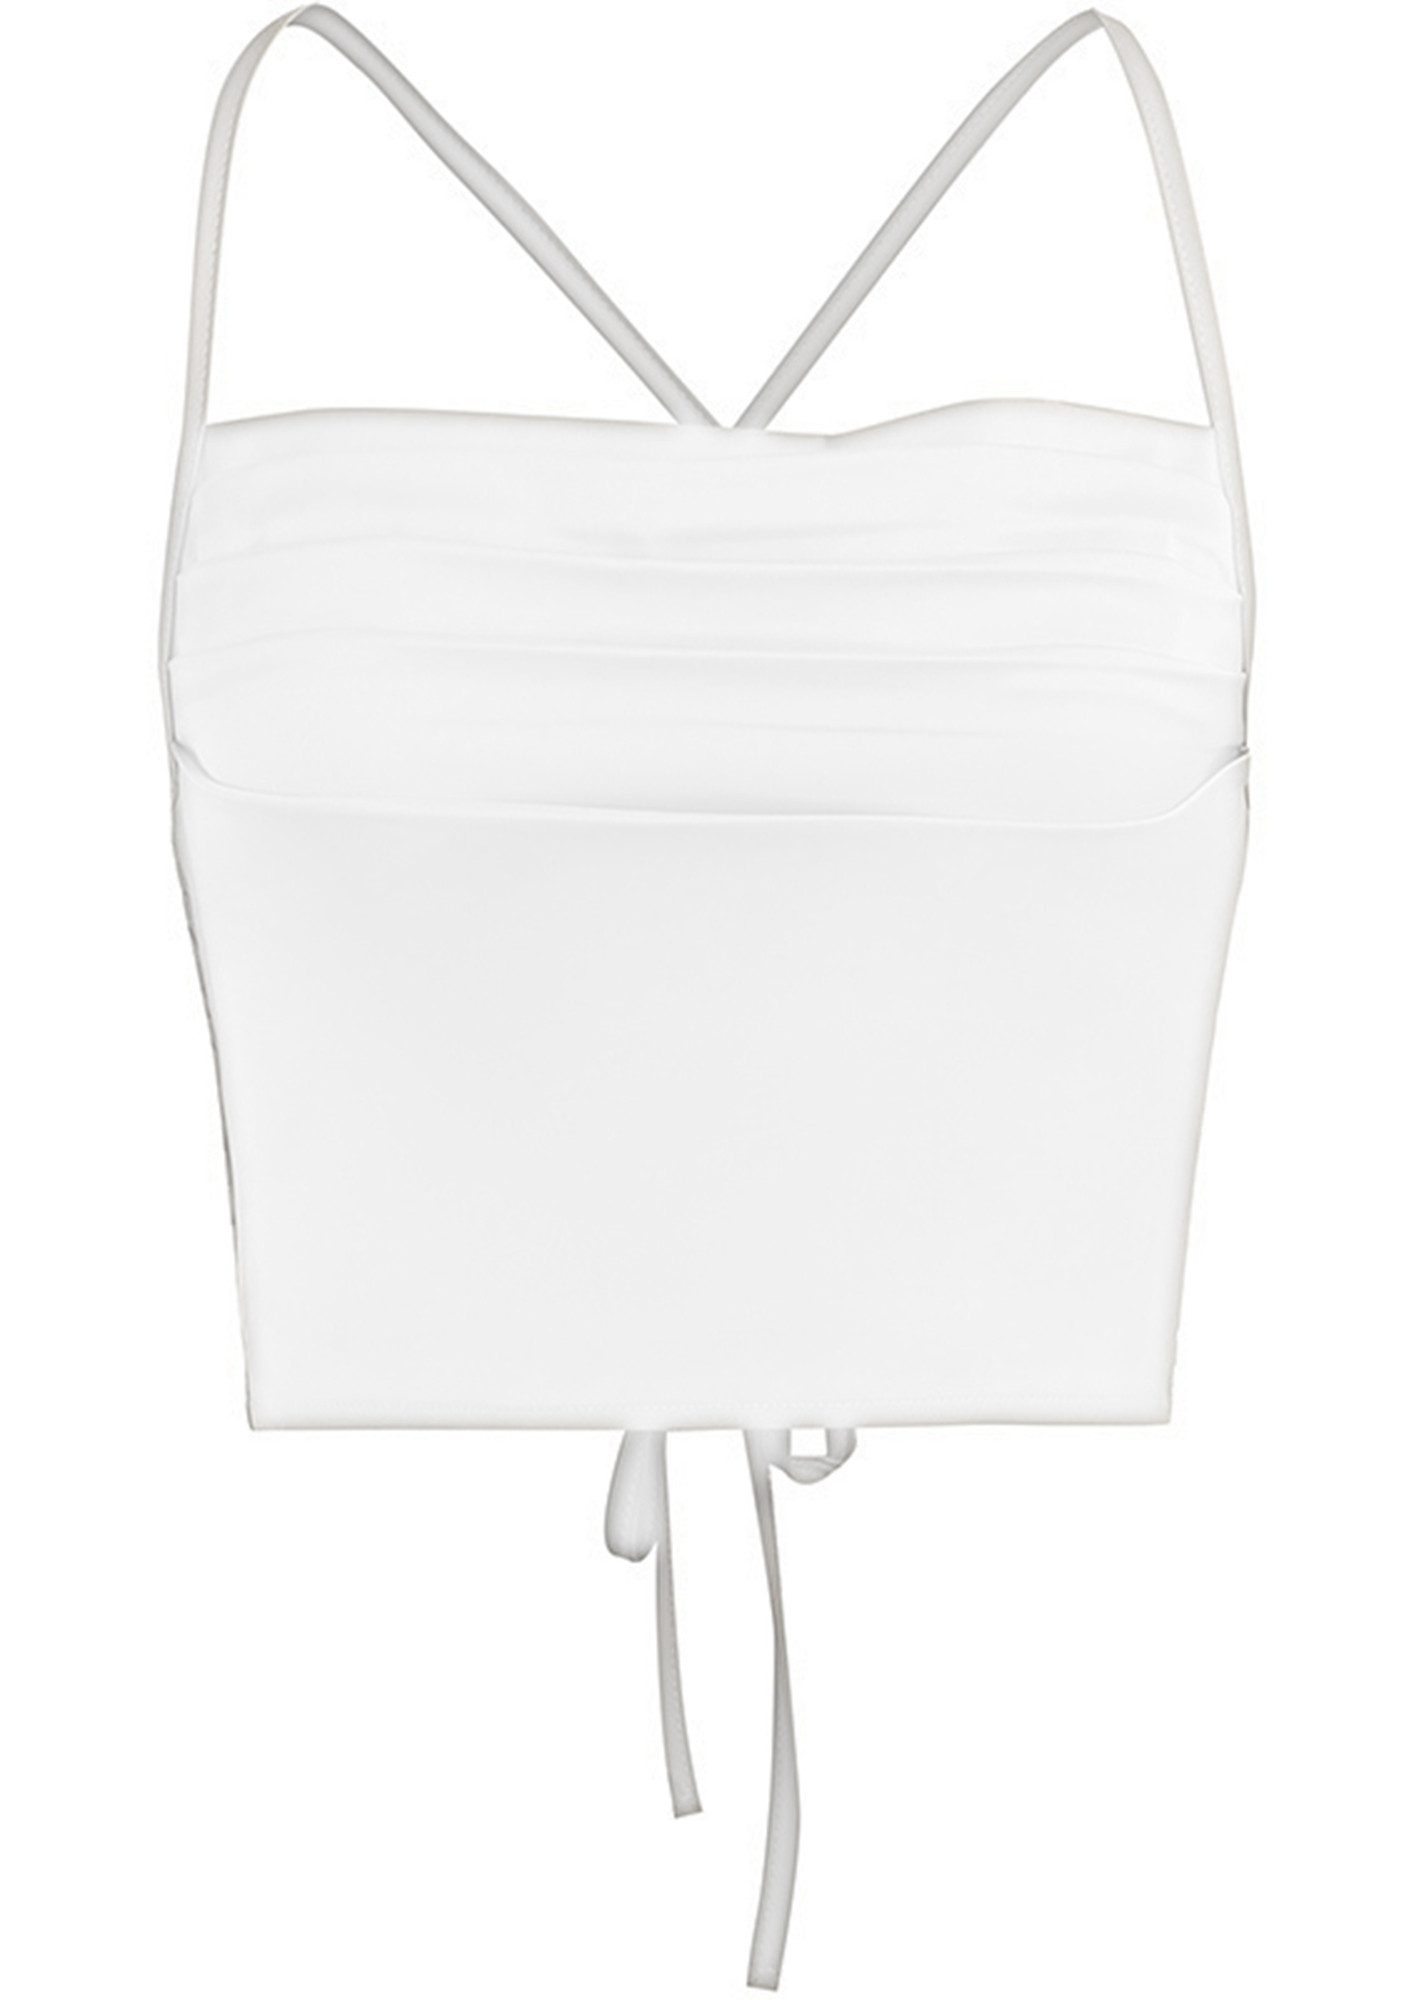 UNDER POSESSION OF WHITE COWL NECK, SLEEVELESS,RUCHED, SMOCK BACK AND LACE TIE DETAIL CROP TOP